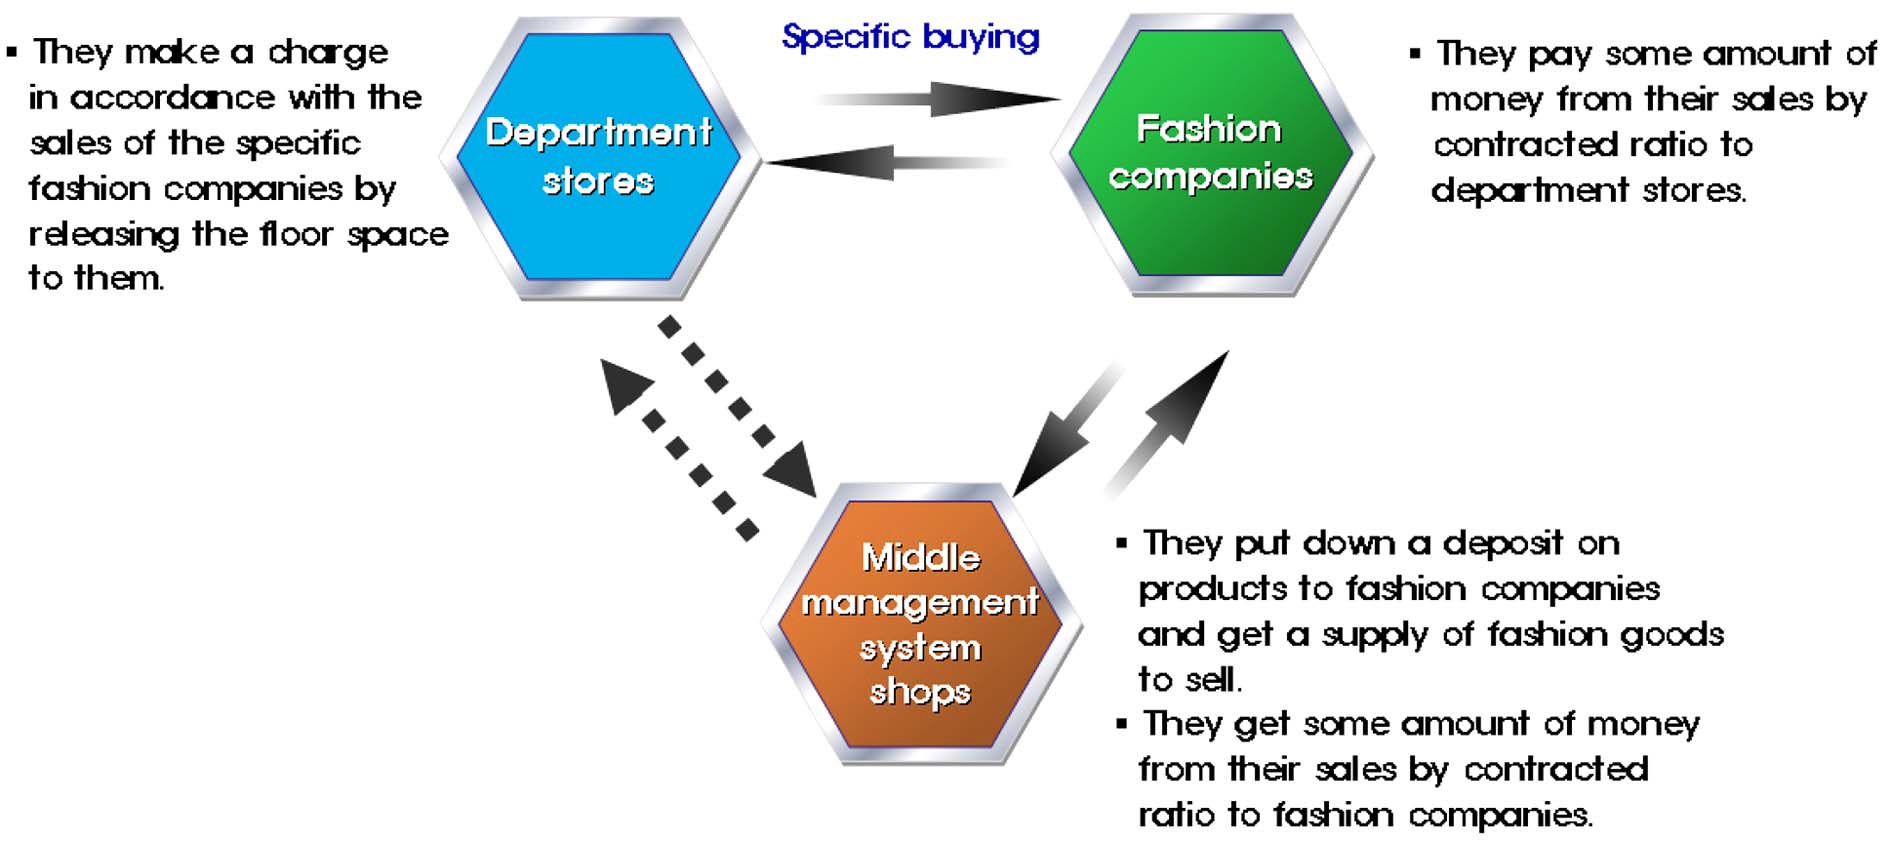 Transection structure of the middle management system.